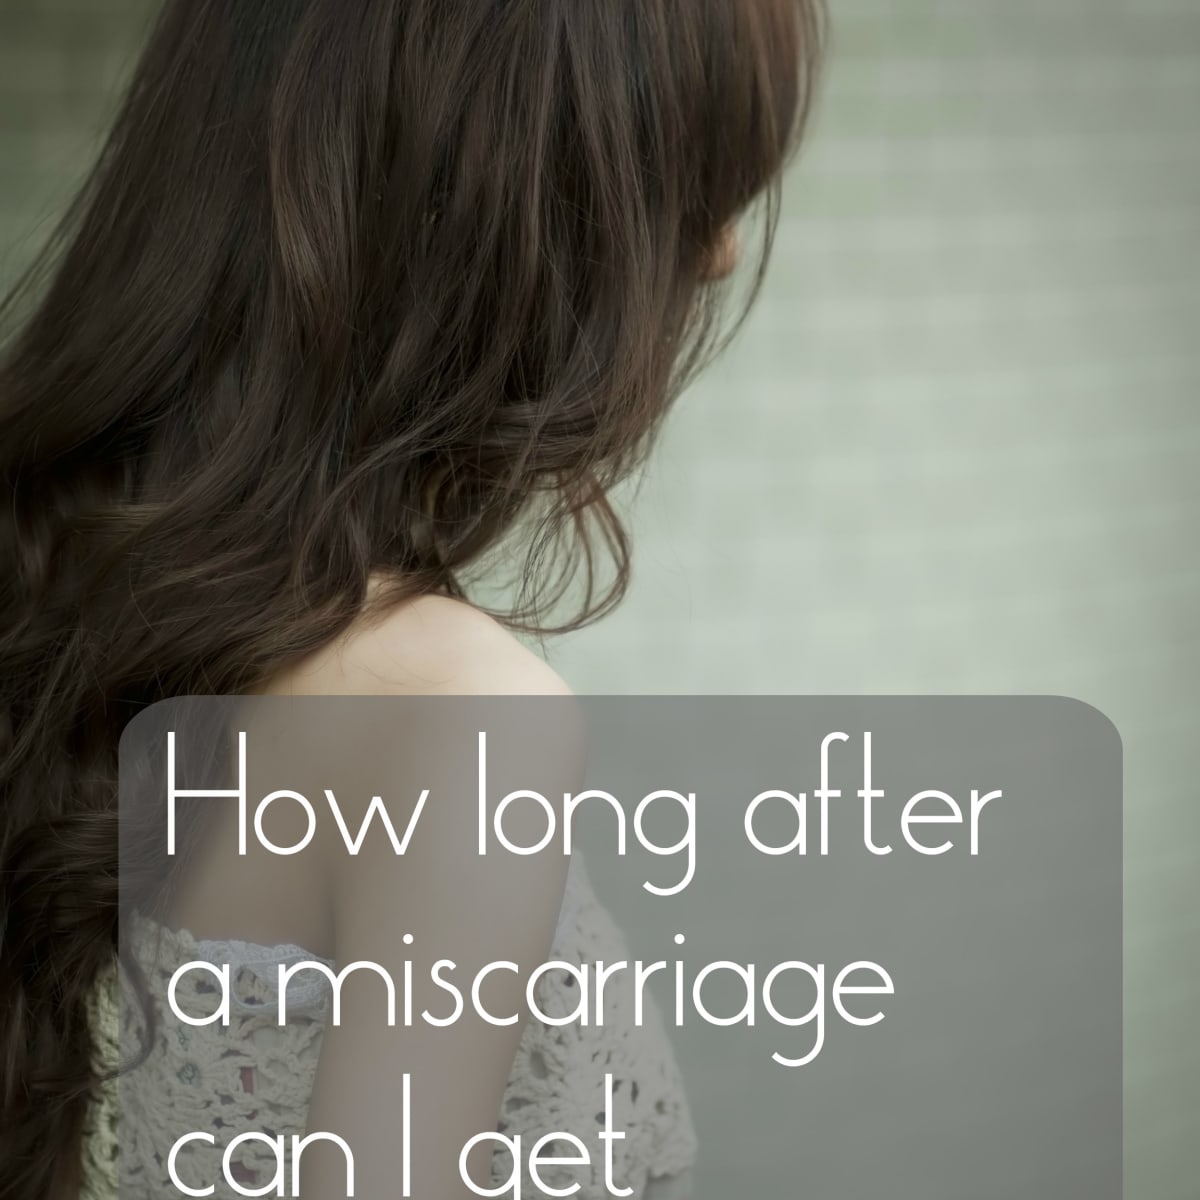 What does 2 week miscarriage look like?